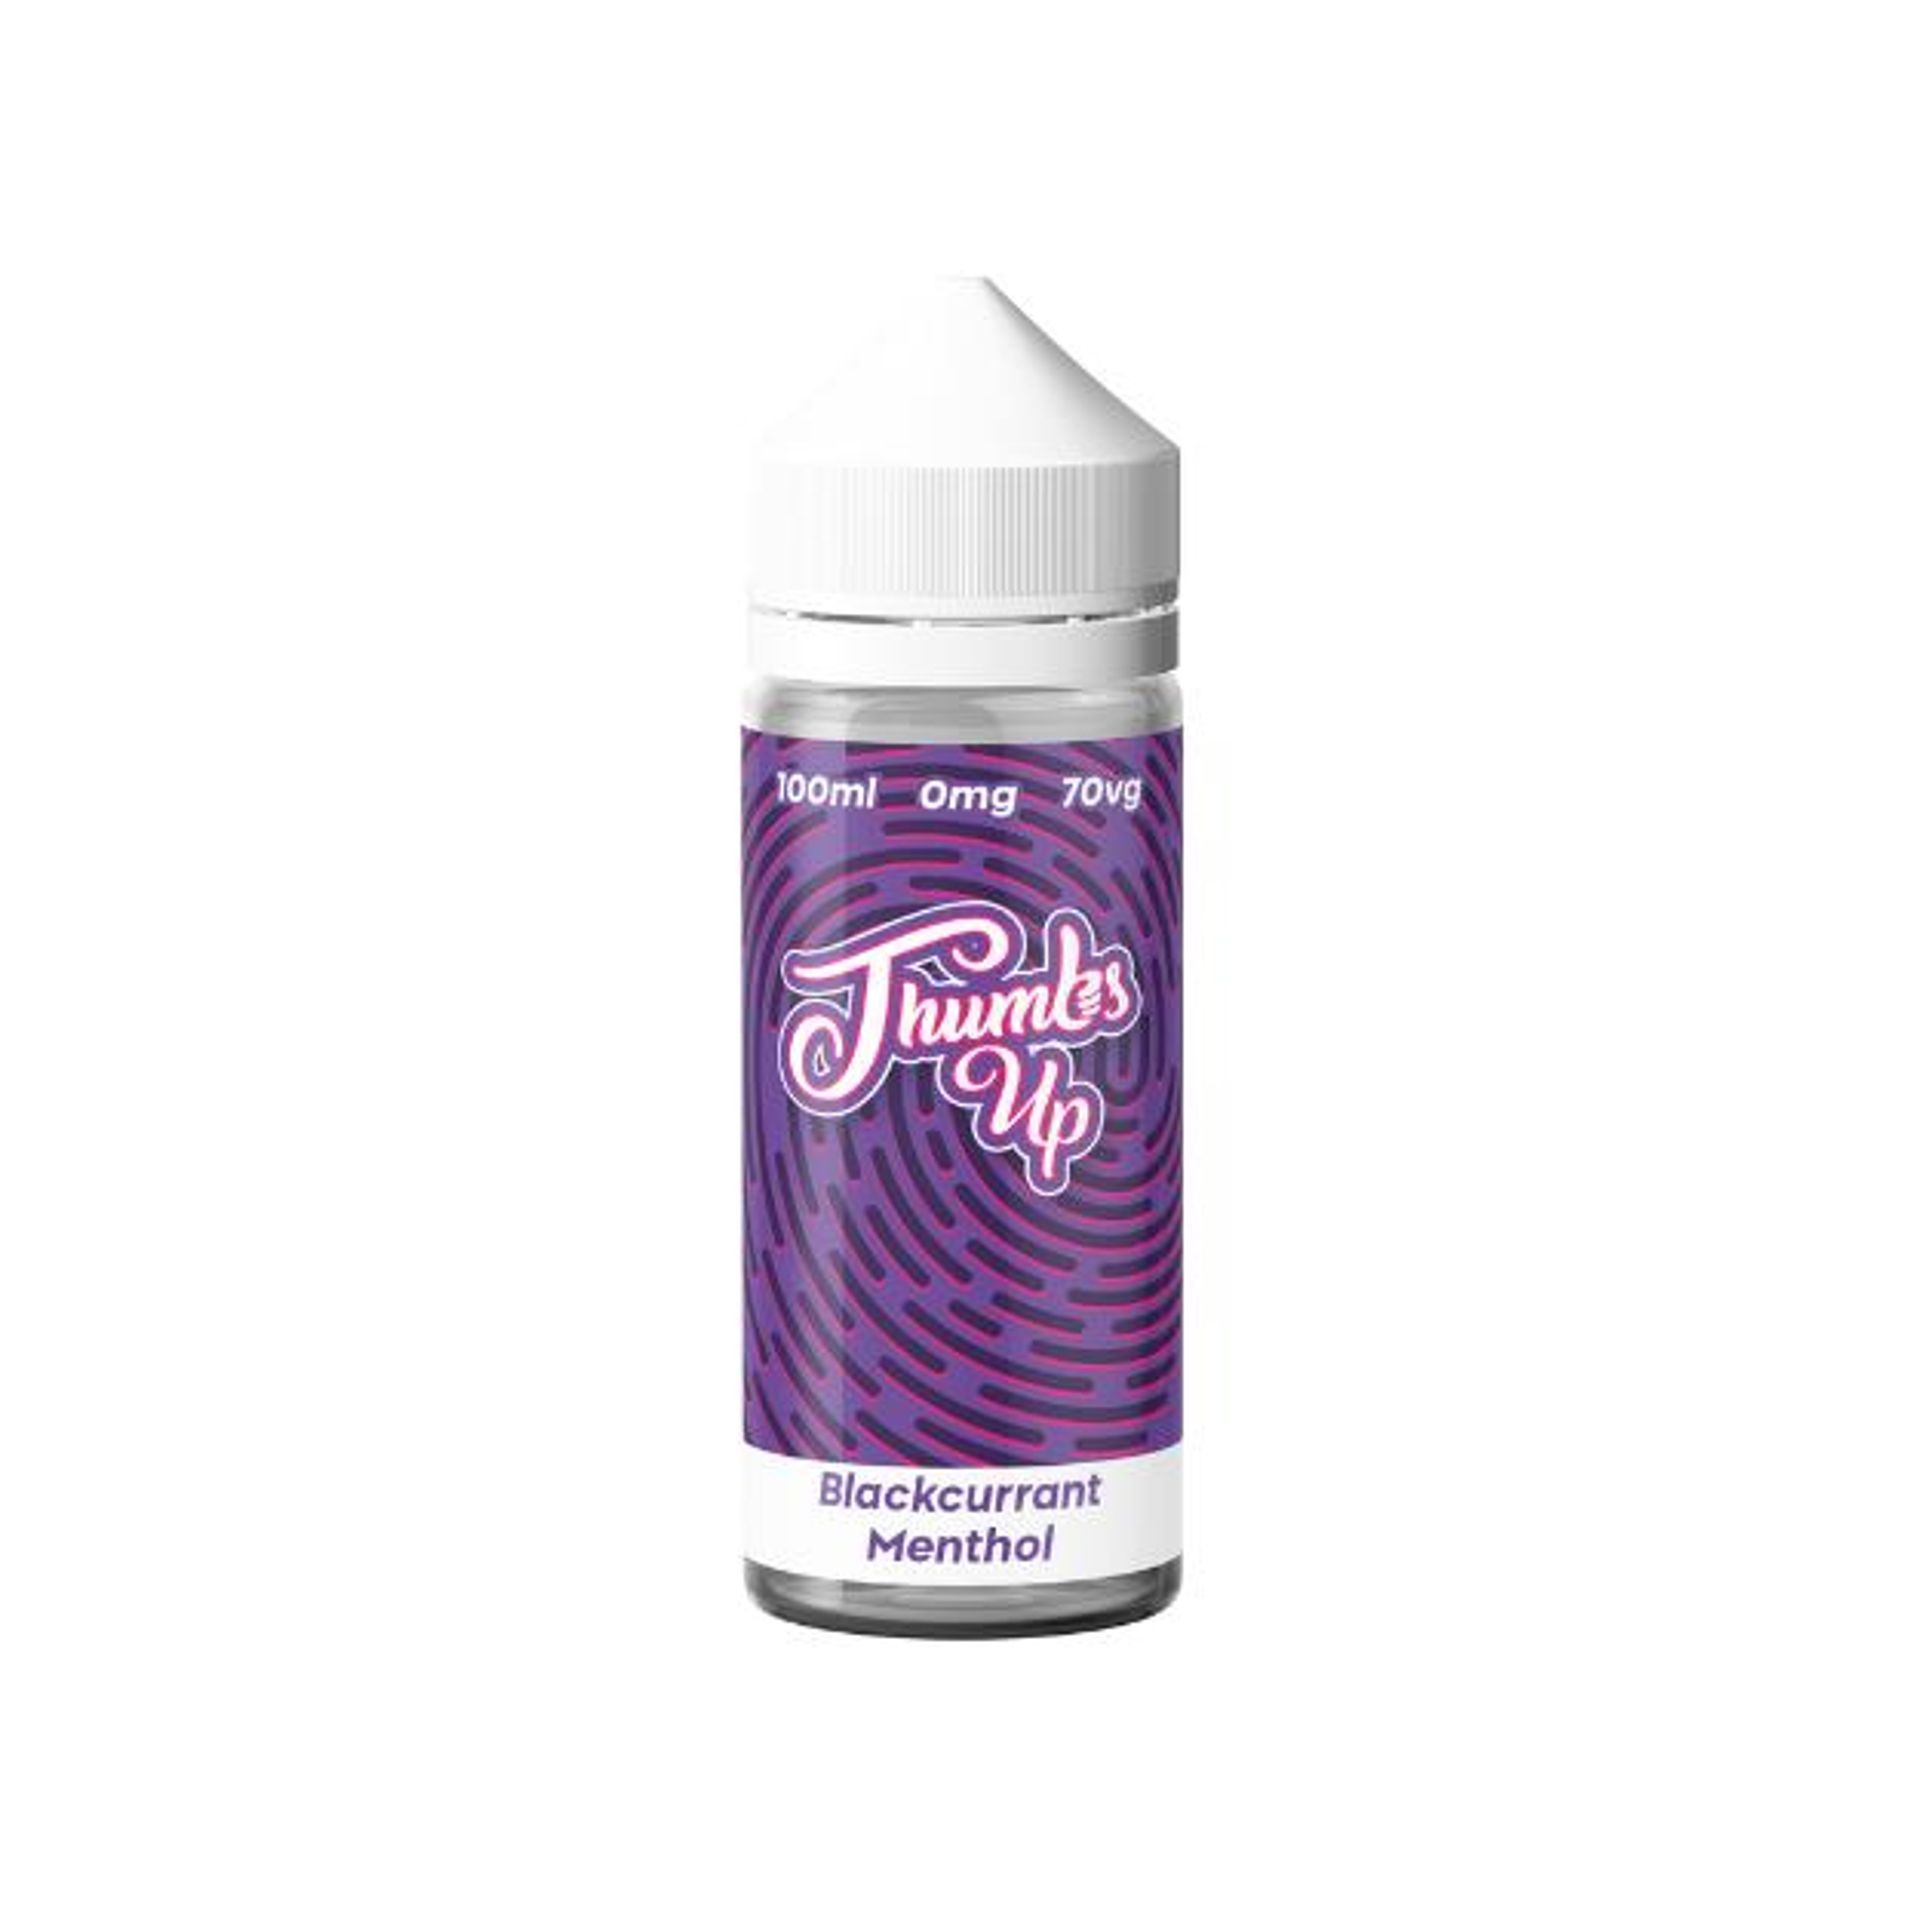 Image of Blackcurrant Menthol by Thumbs Up